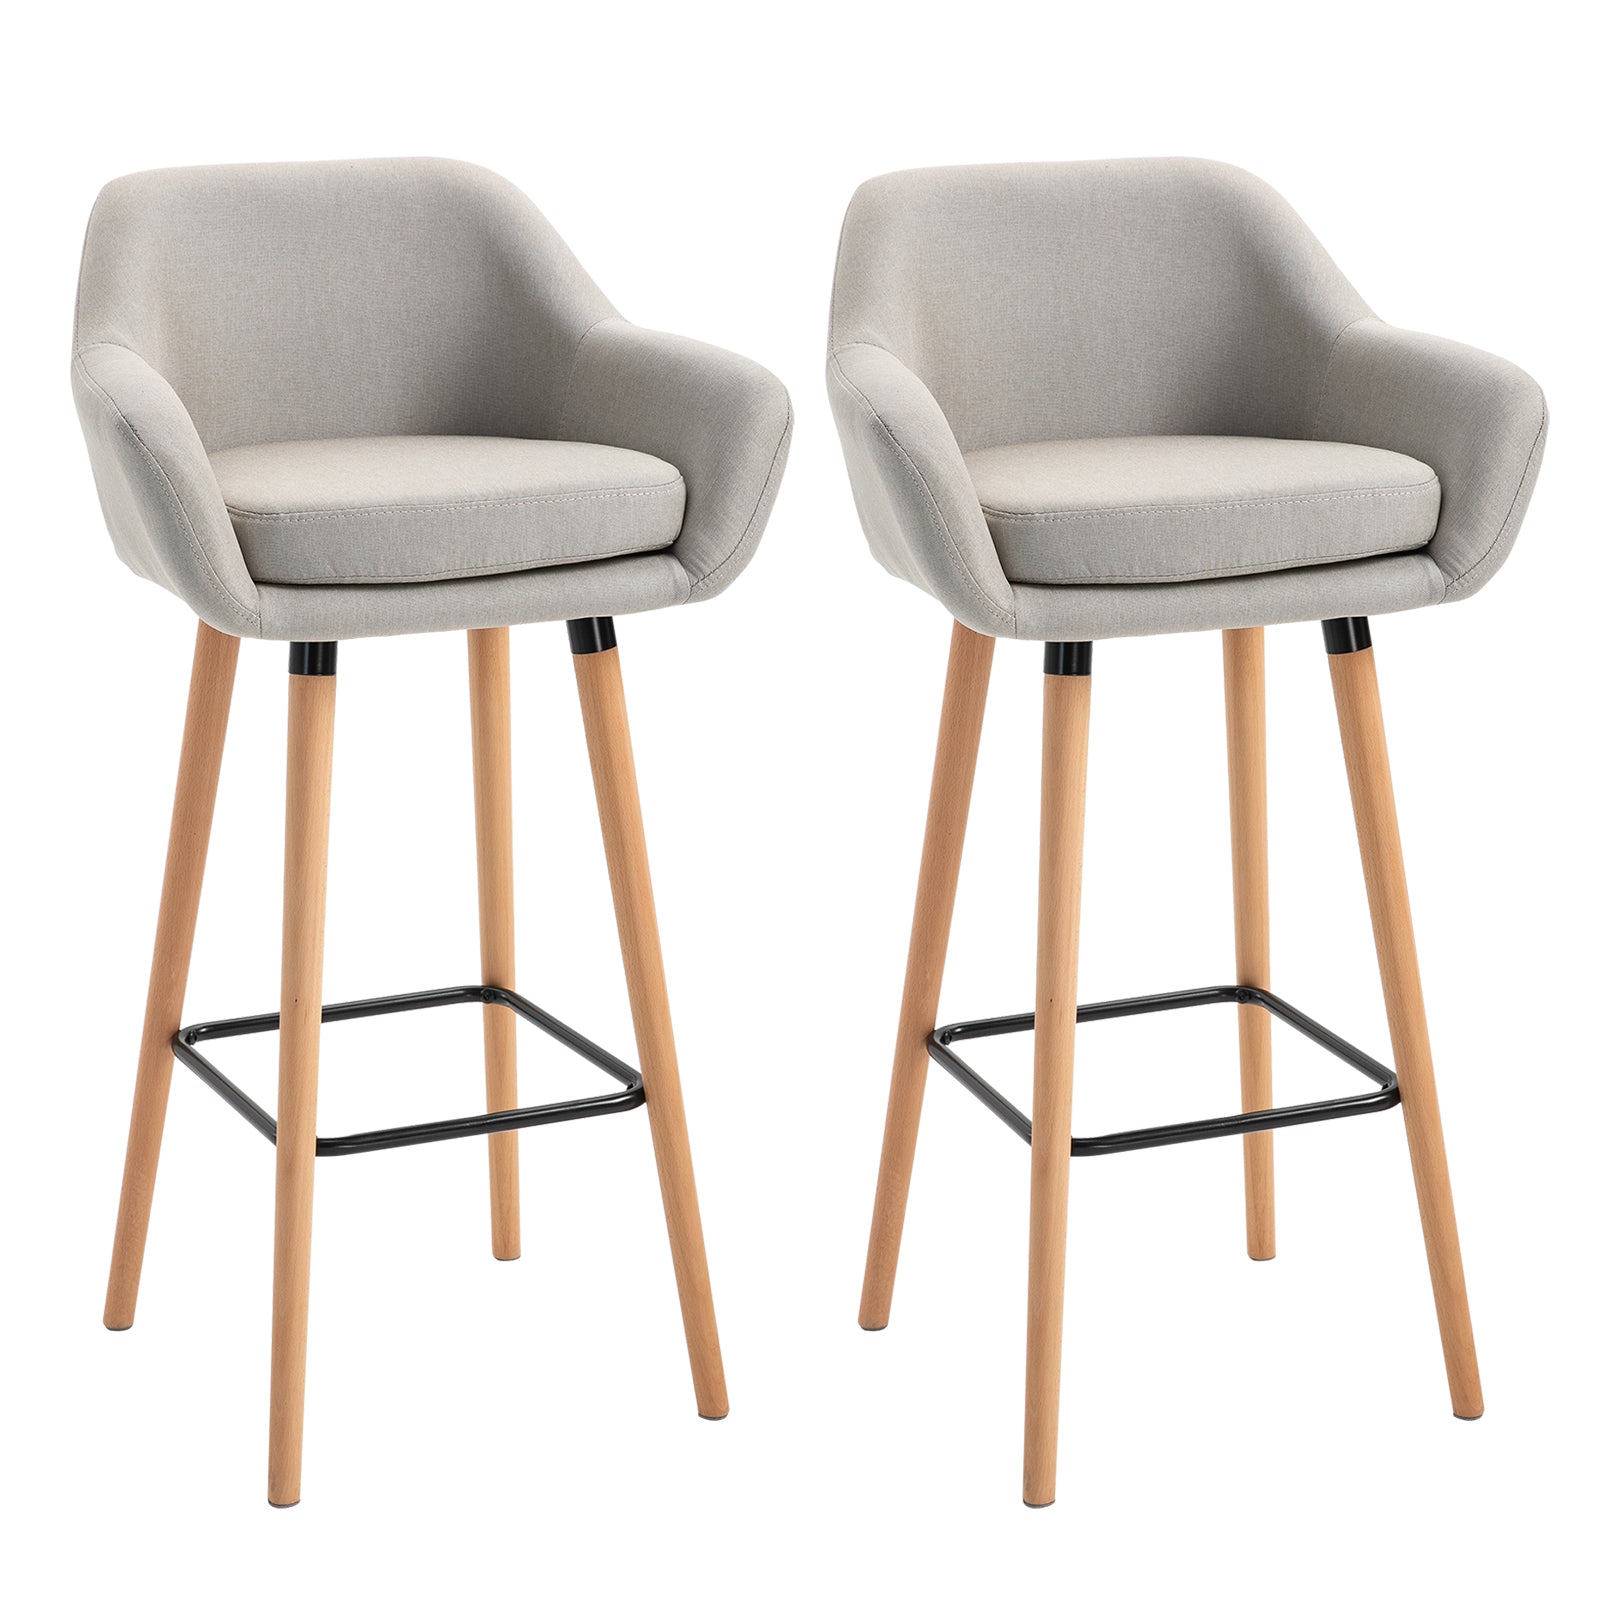 Set of 2 Bar Stools Modern Upholstered Seat Bar Chairs w/ Metal Frame, Solid Wood Legs Living Room Dining Room Fabric Furniture - Beige  AOSOM   